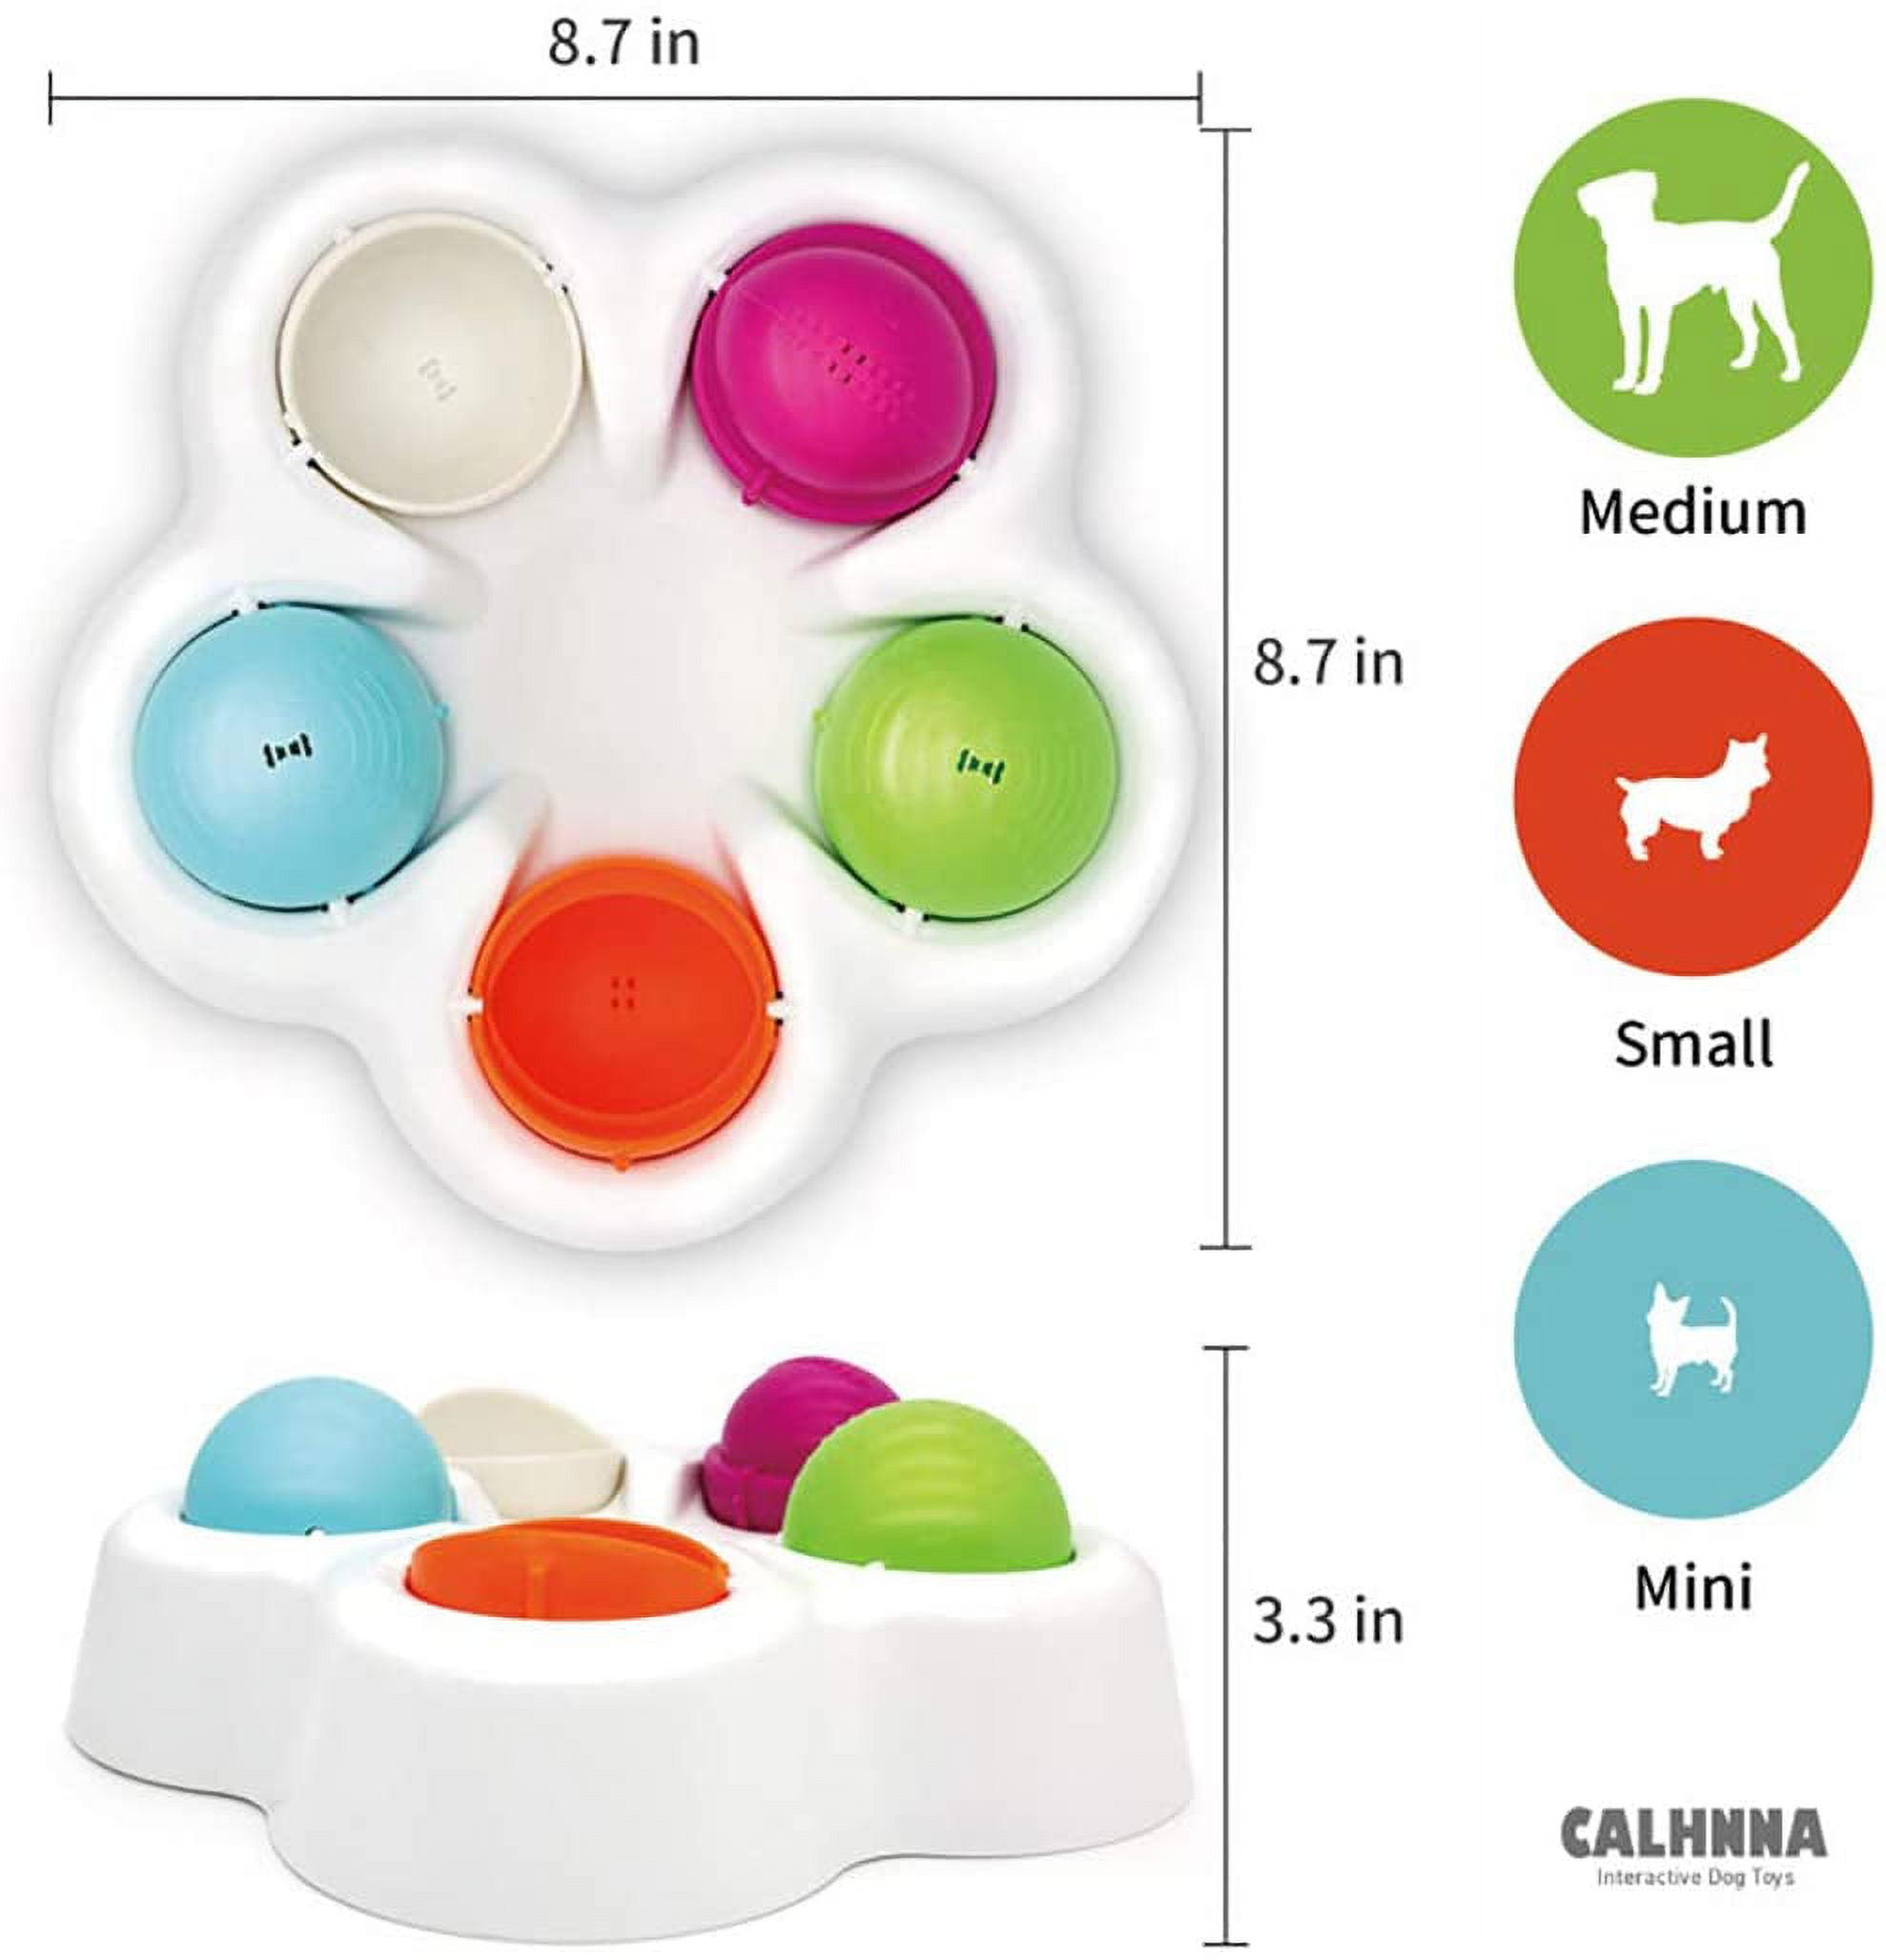 Cat and DOG Chat With Caren: Challenge your Pet with the 2 in 1 Dog Treat  Puzzle & Chew Toy by Uahpet!